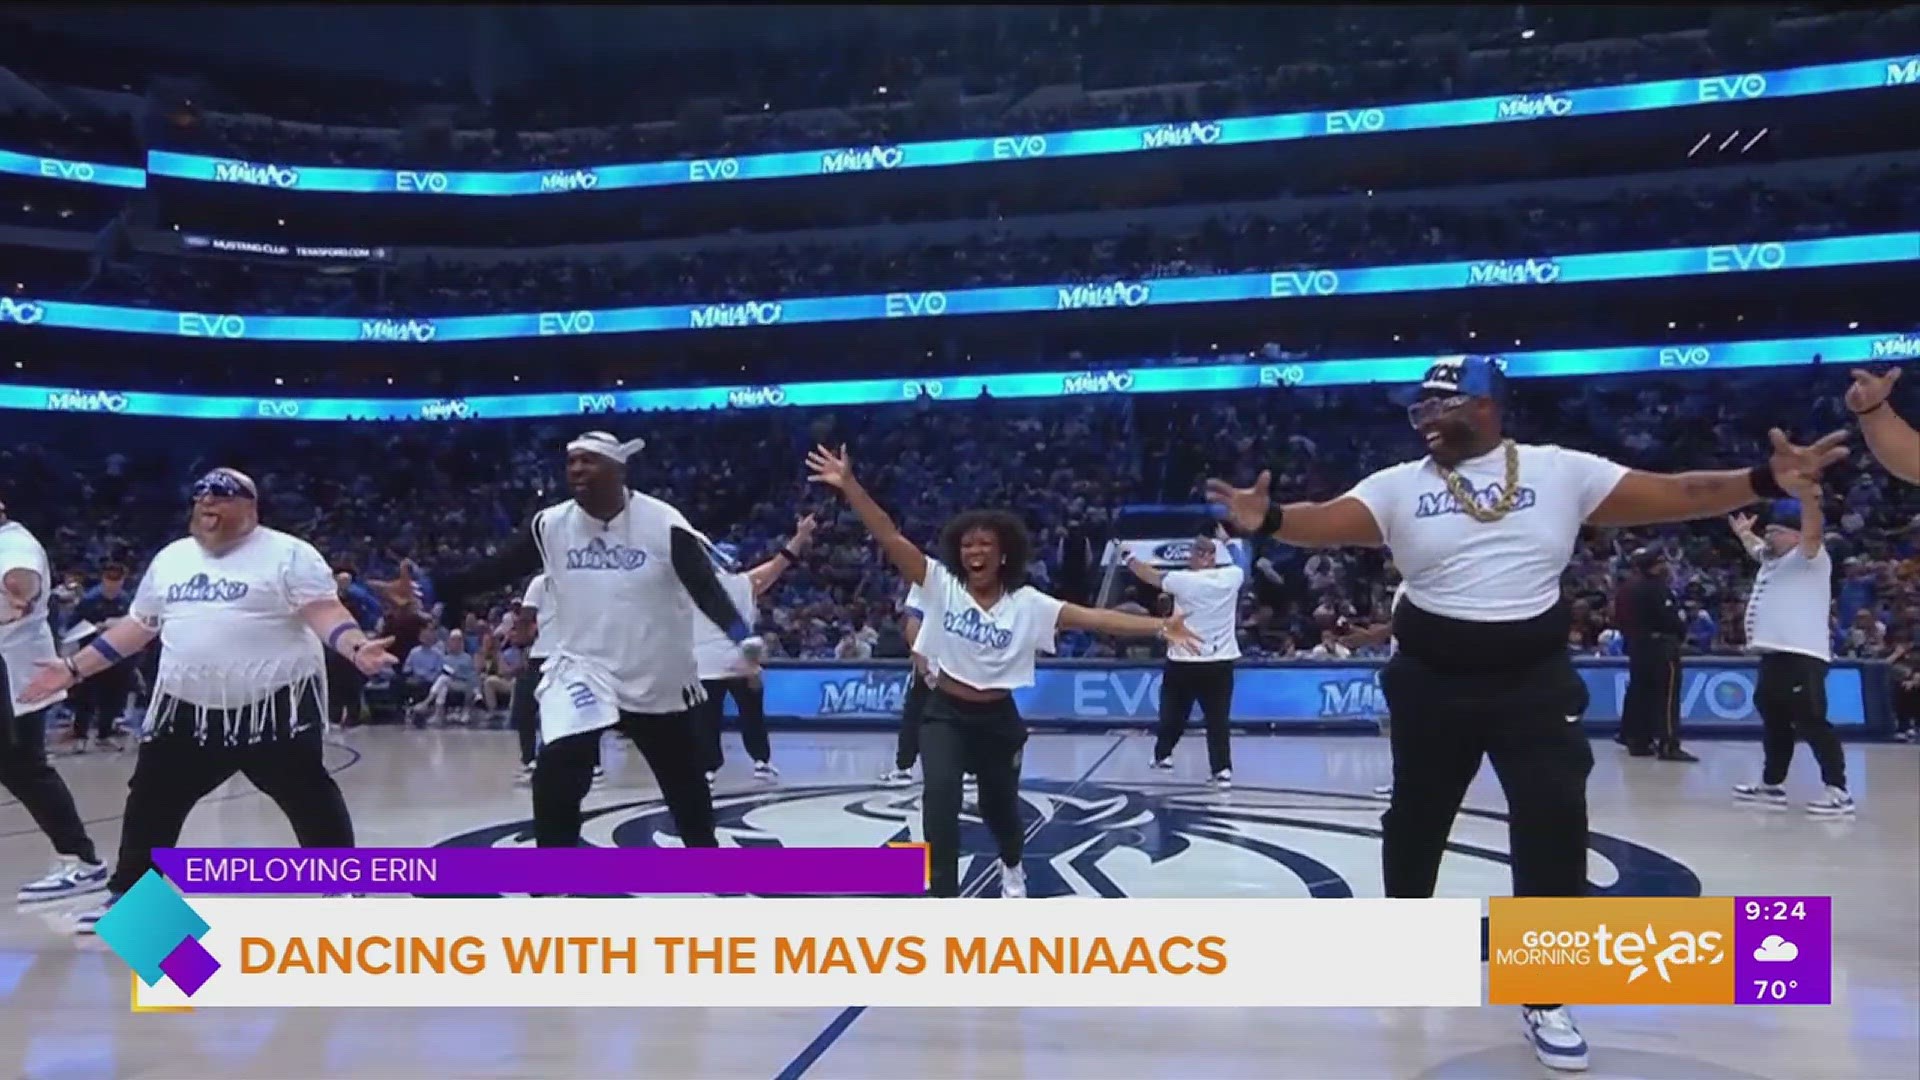 Erin find out what it's like to dance like a ManiAAC in front of a packed AAC.